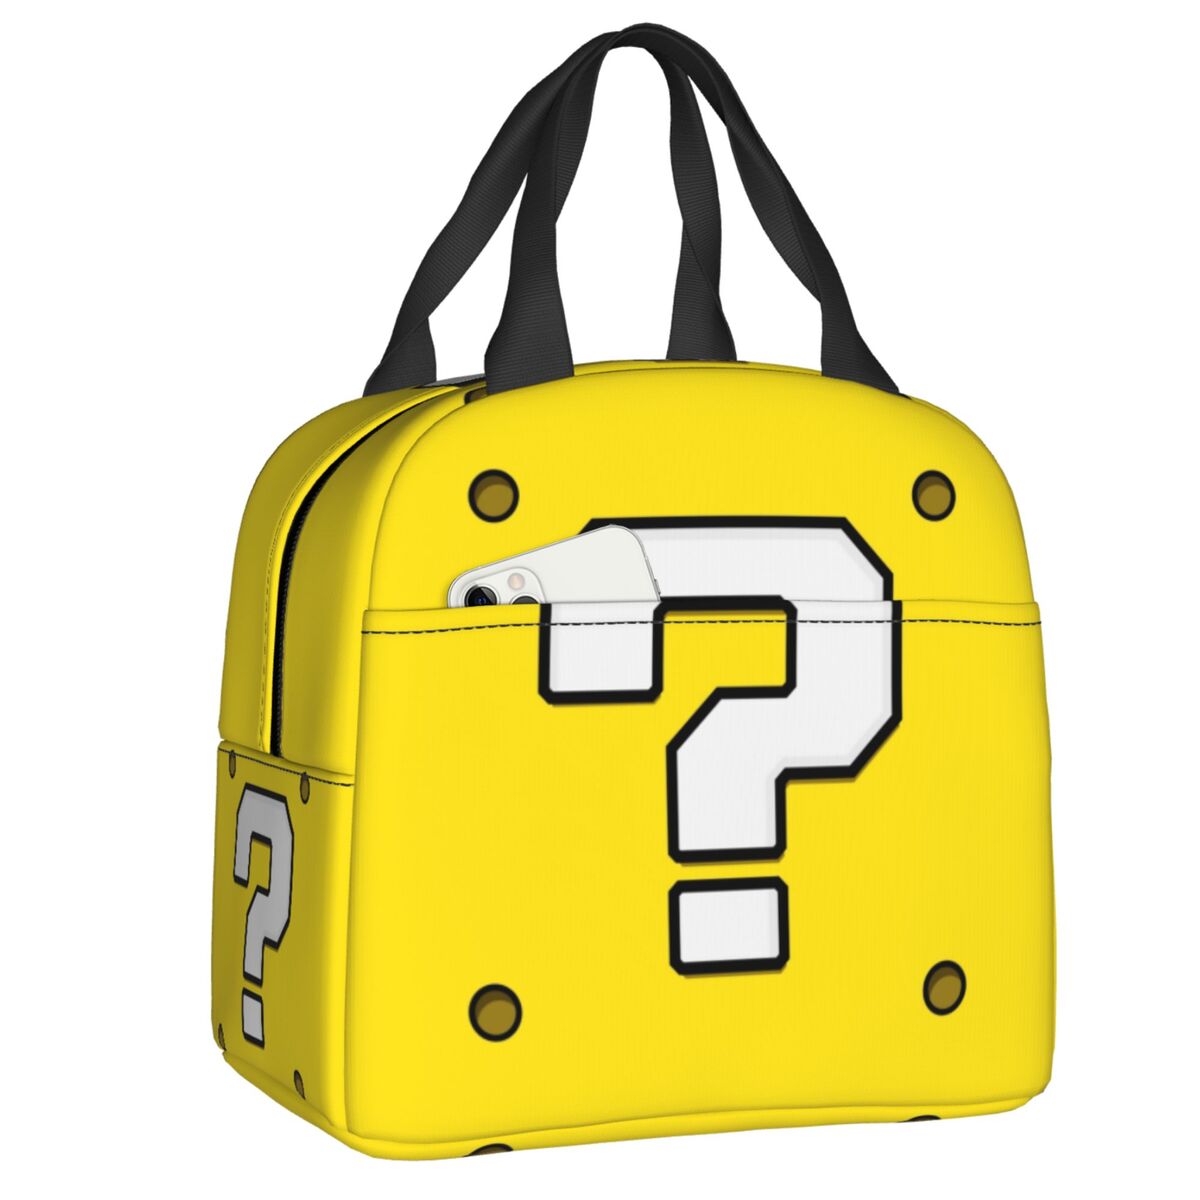 Super Mario Brothers Retro Video Game Insulated Lunchbox